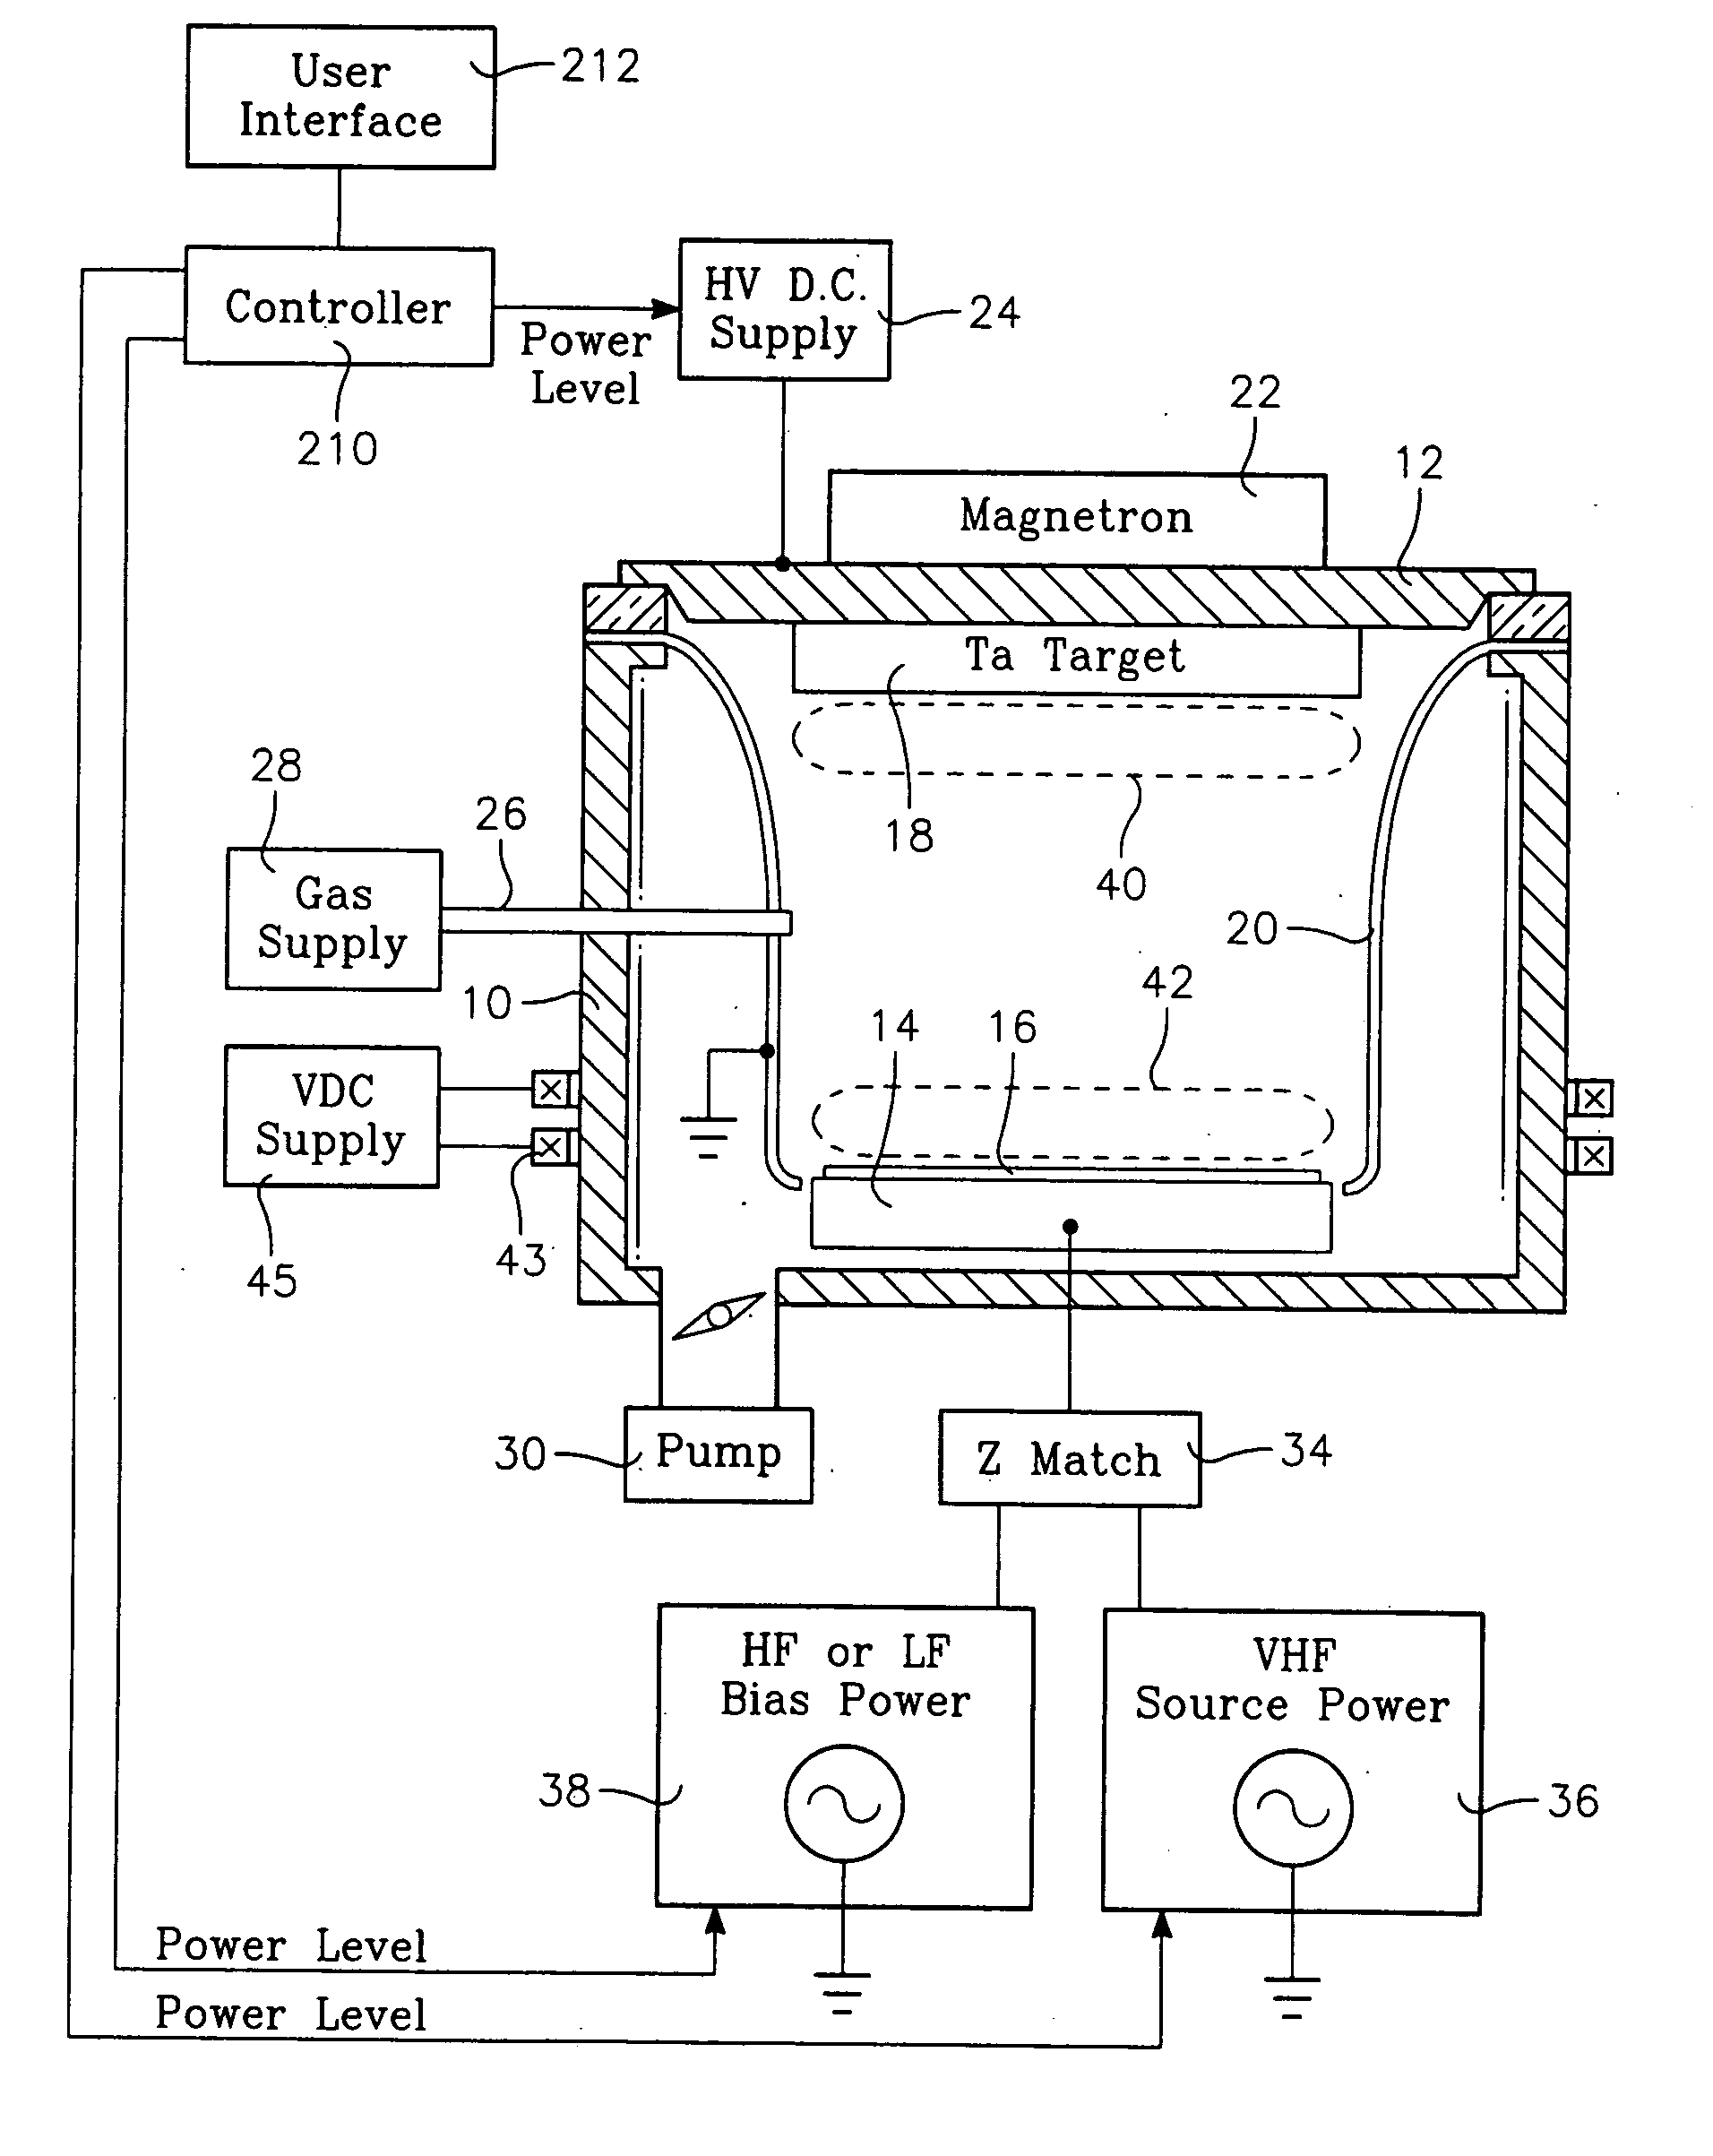 Physical vapor deposition plasma reactor with RF source power applied to the target